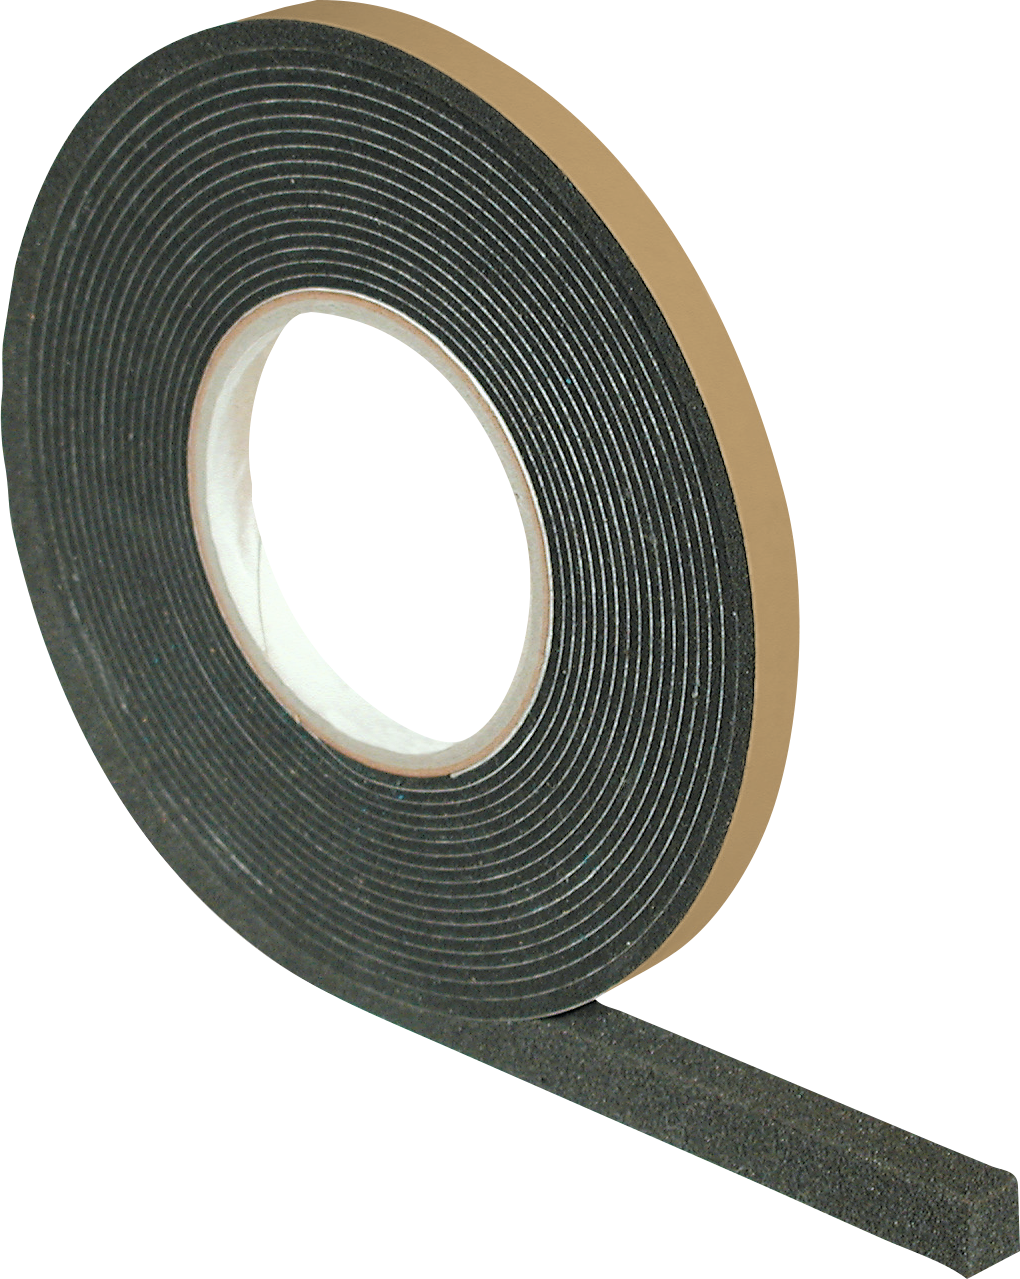 OTTO FUGENBAND BG1 20/4 A VE 40M 8M/ROLLE